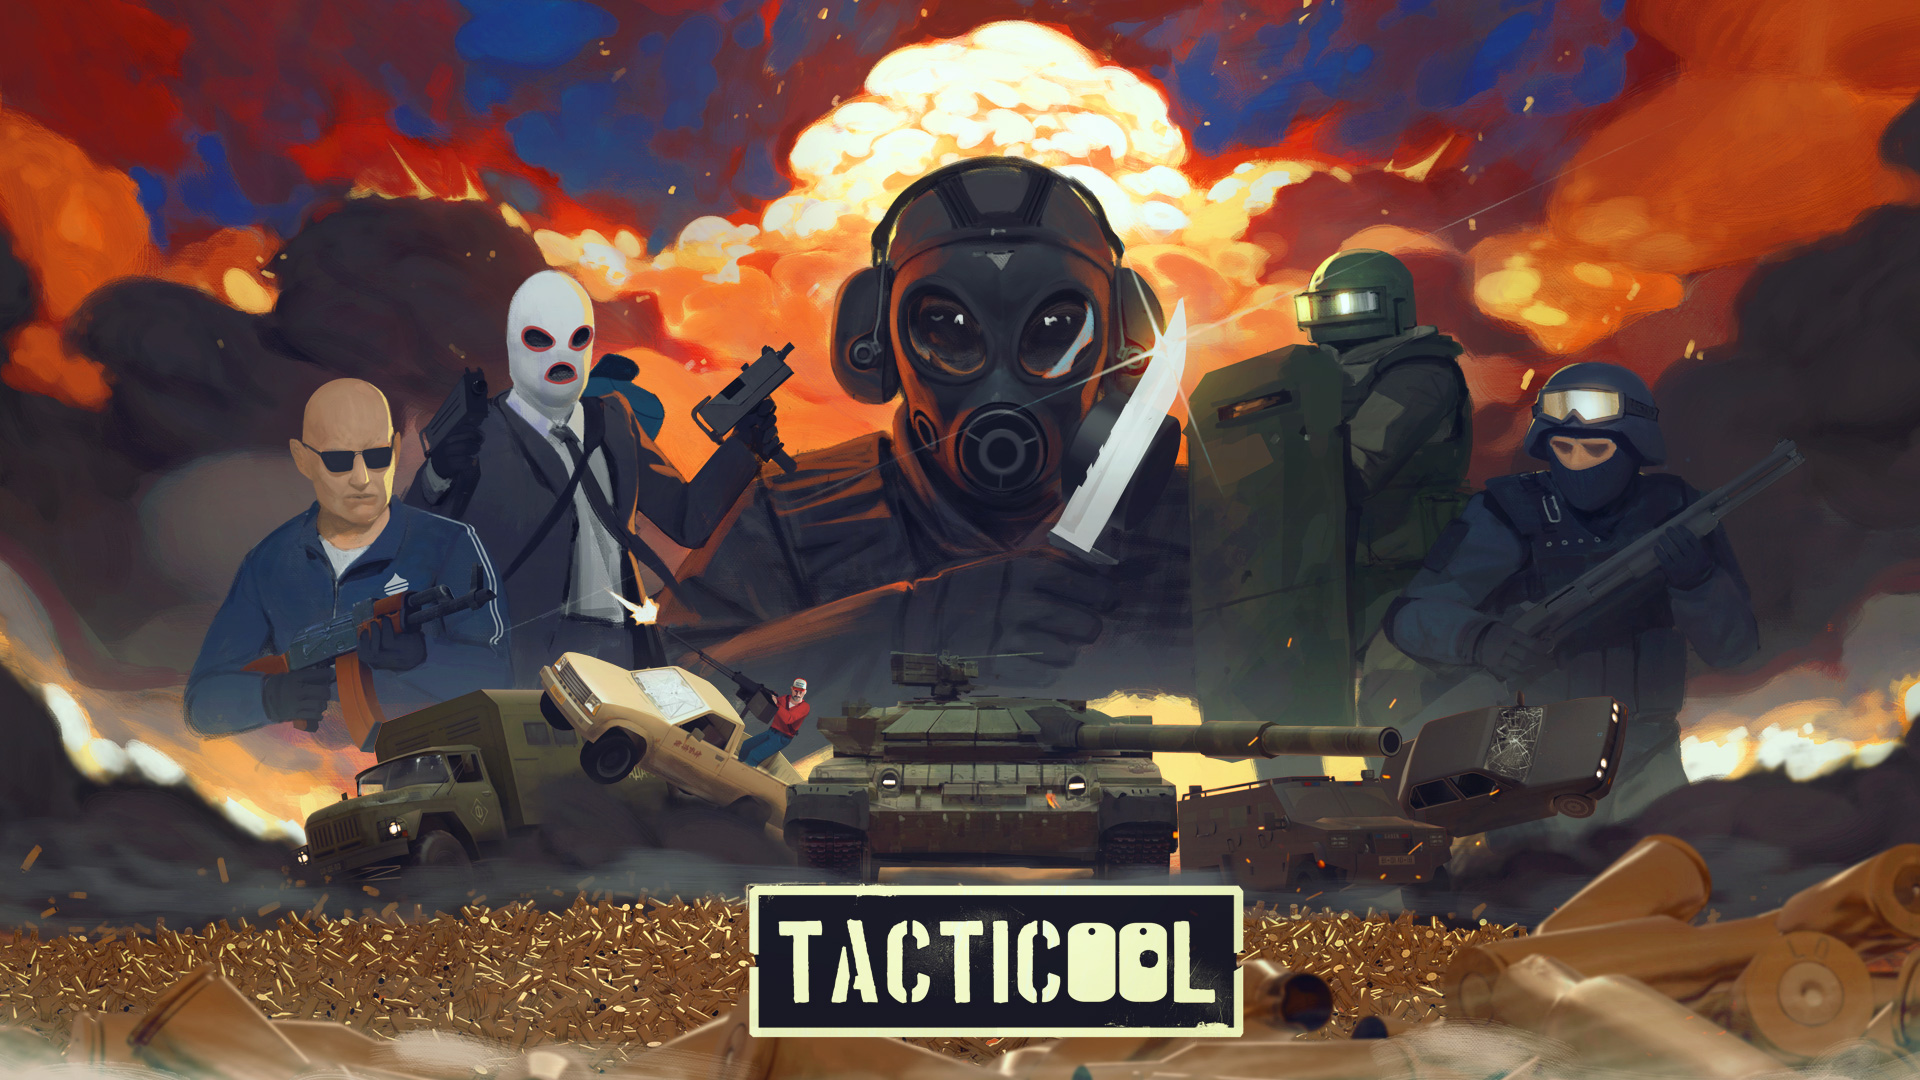 MY.GAMES Hardcore Isometric Shooter Tacticool Makes the Jump to PC